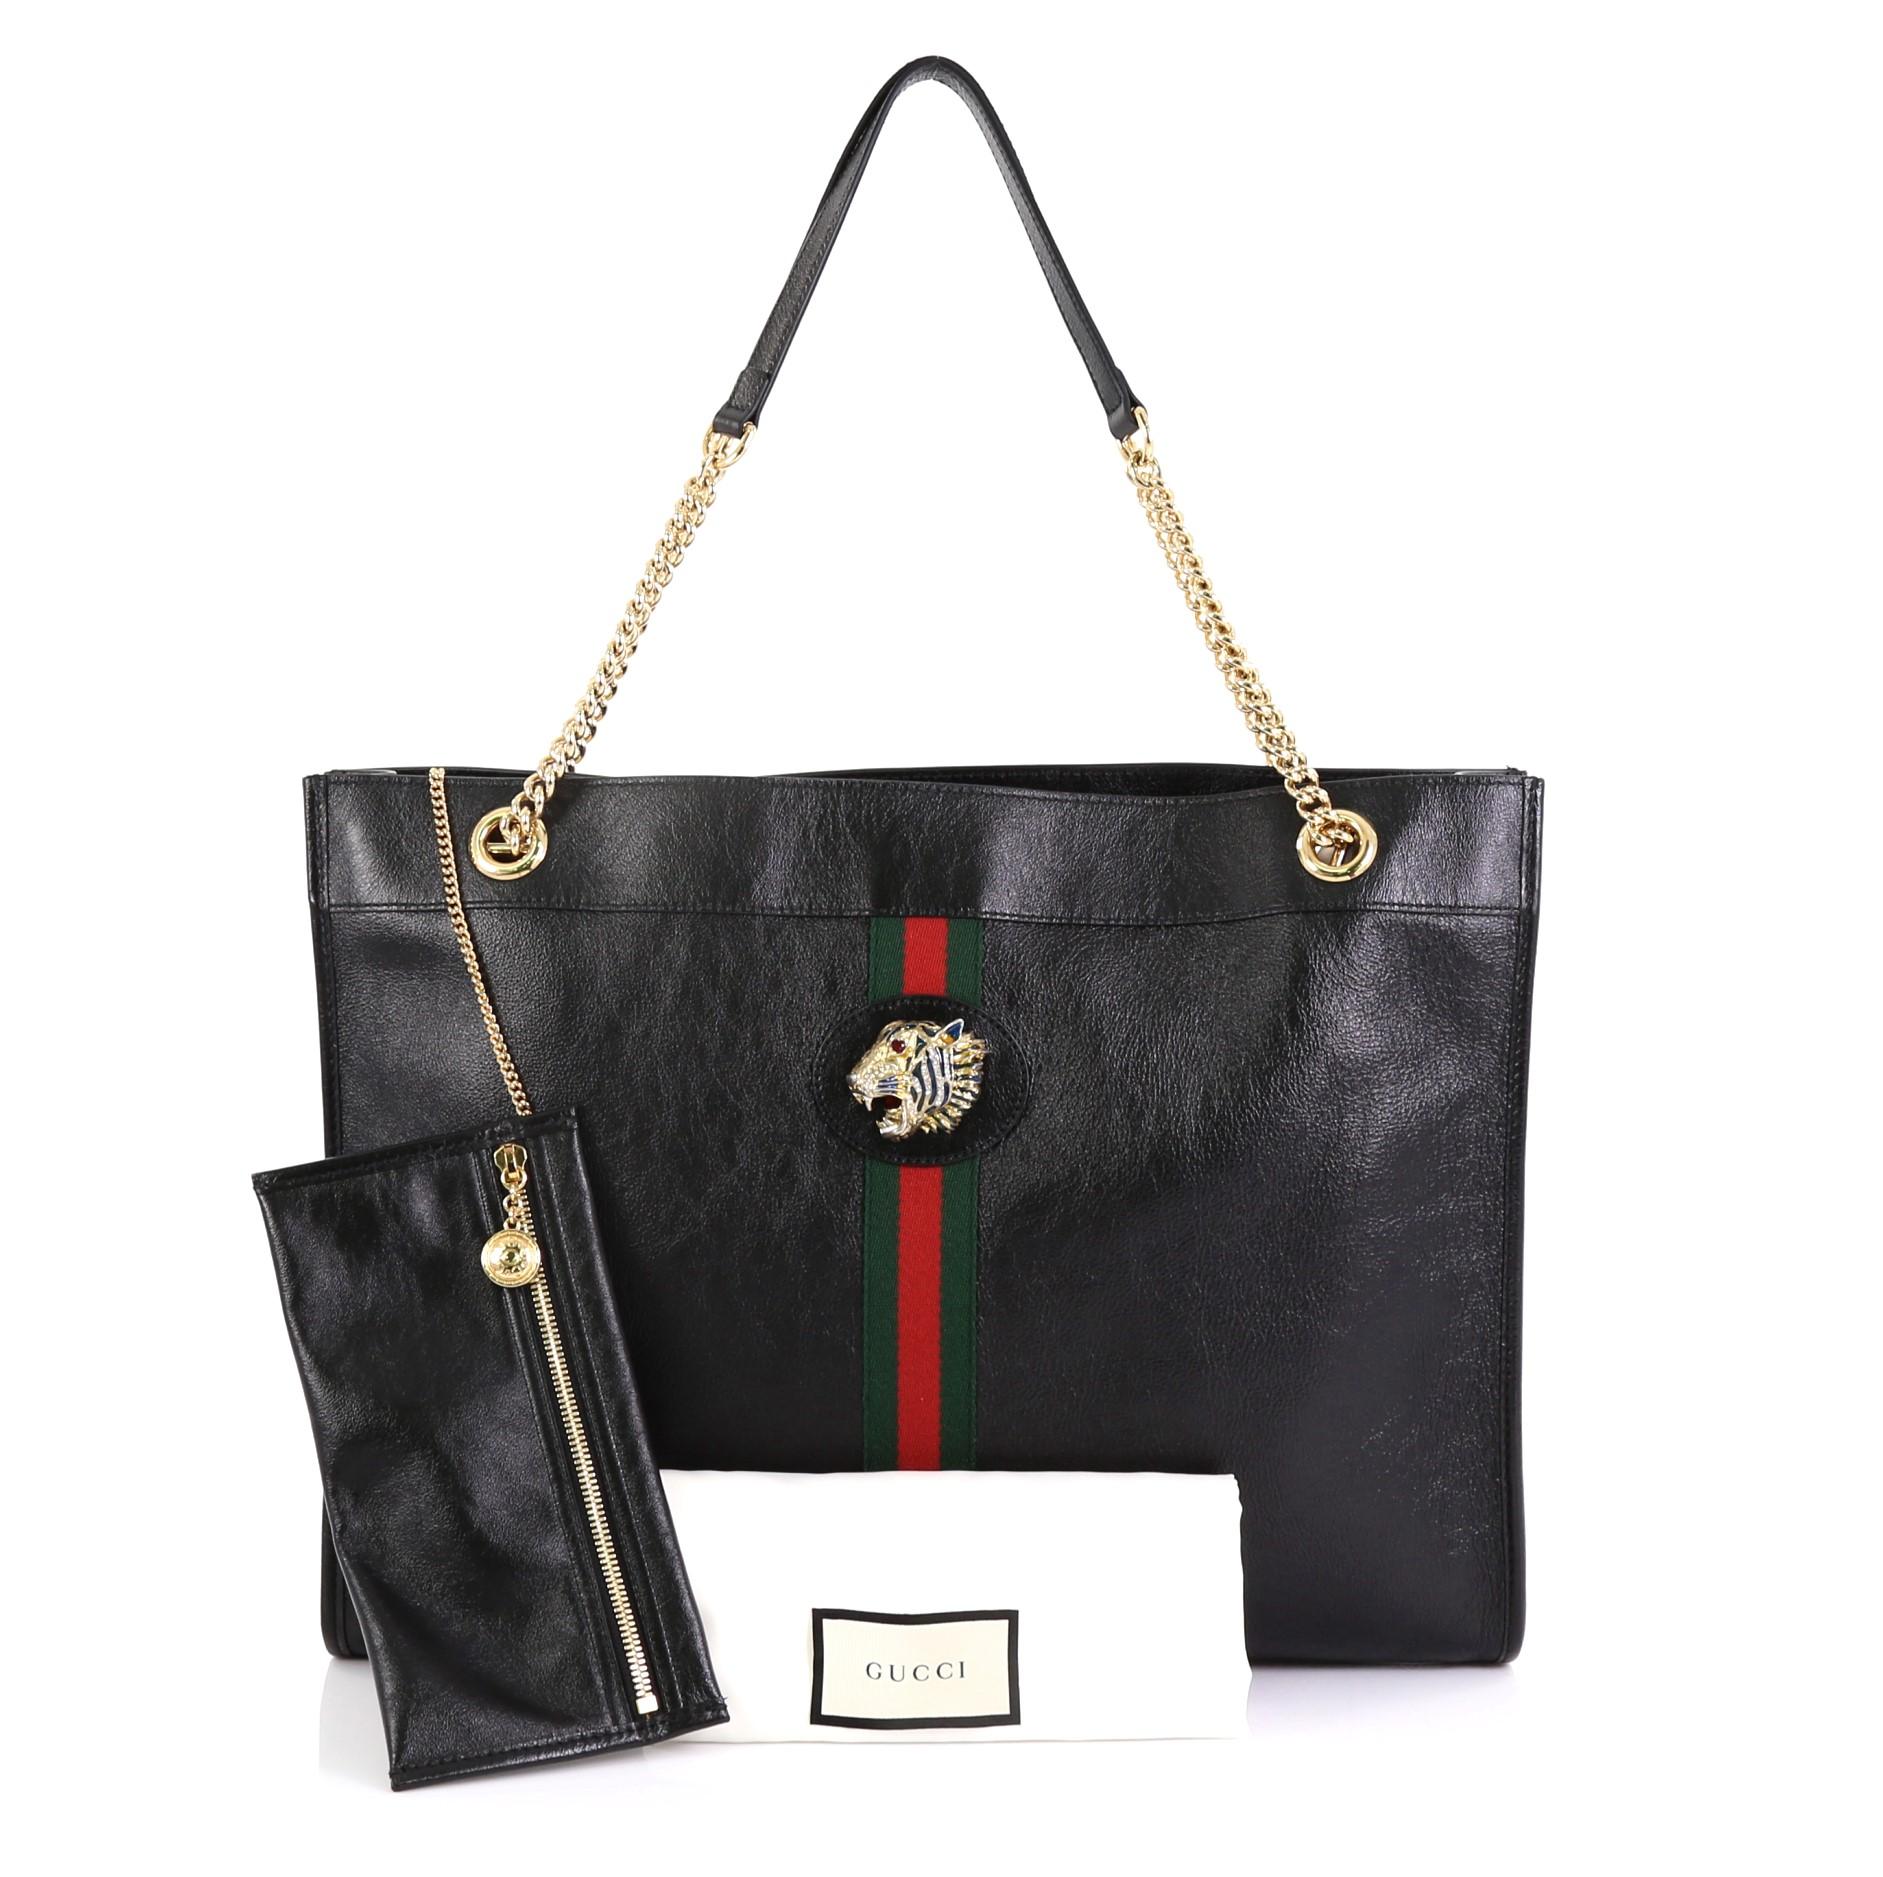 This Gucci Rajah Chain Tote Leather Large, crafted from black leather, features chain straps with leather pads, web stripe detailing, enameled tiger head with crystals, and gold-tone hardware. Its magnetic snap closure opens to a beige microfiber